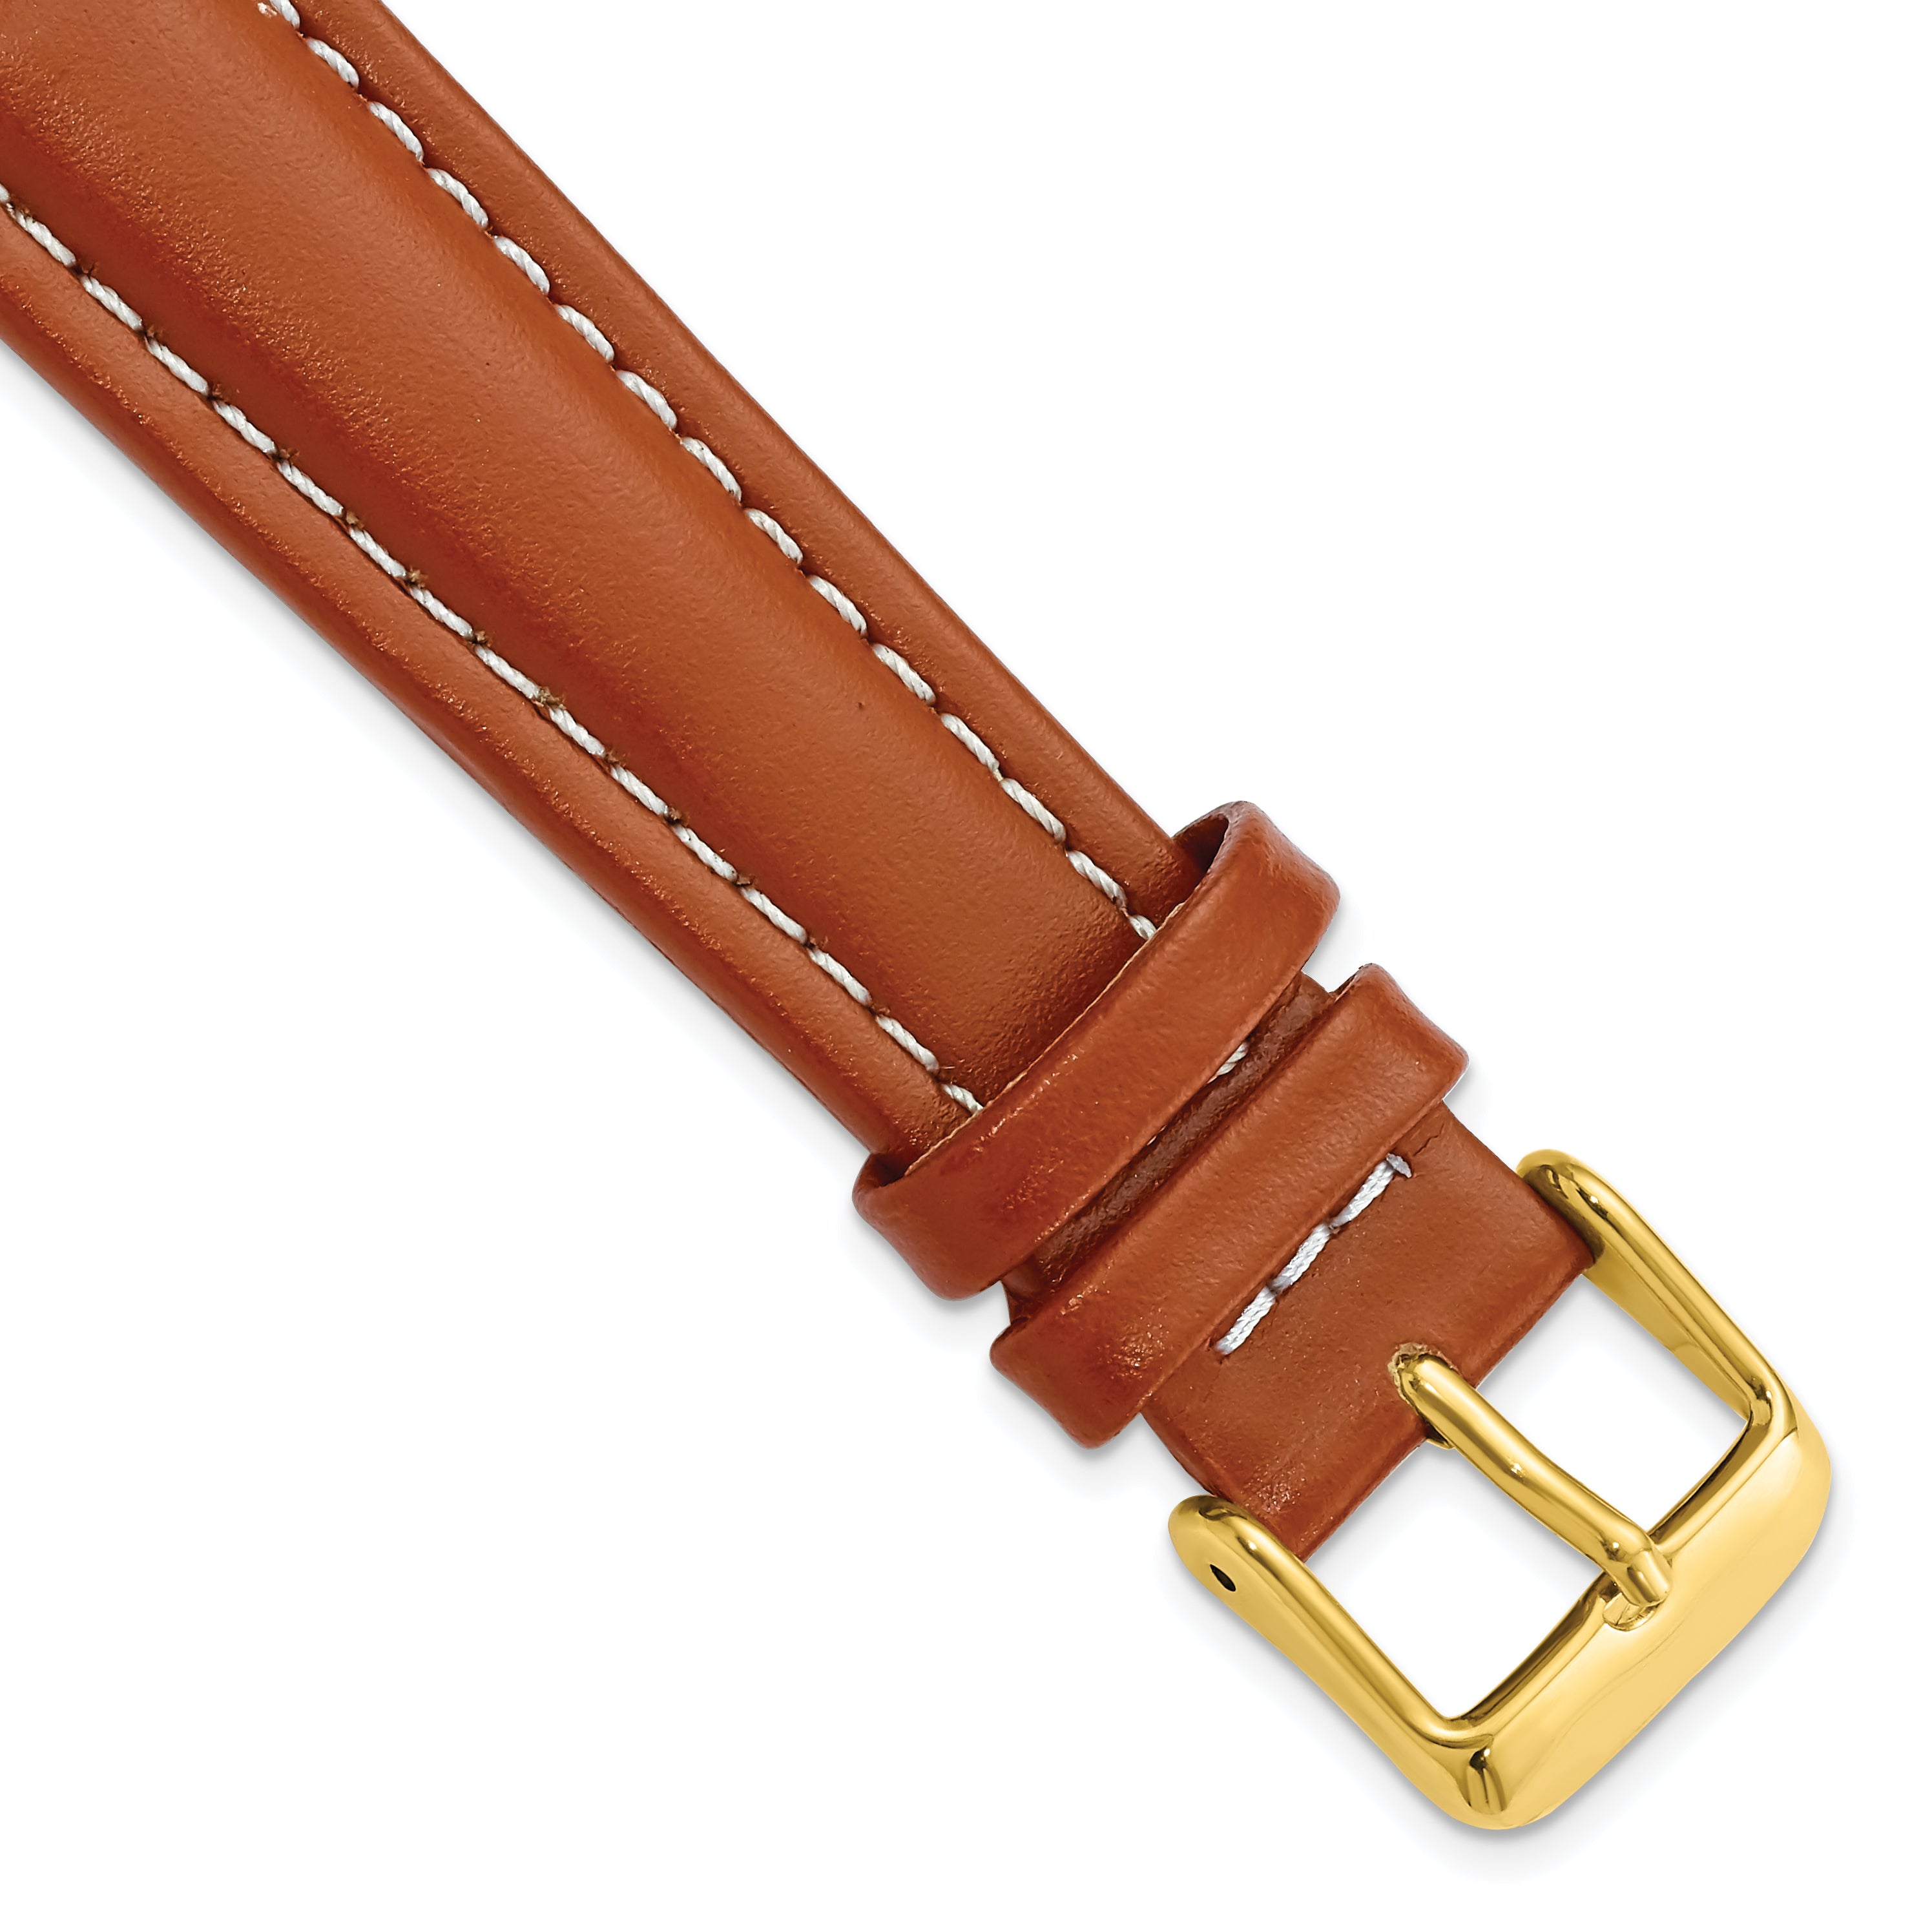 DeBeer 19mm Saddle Brown Oil-tanned Leather with White Stitching and Gold-tone Buckle 7.5 inch Watch Band